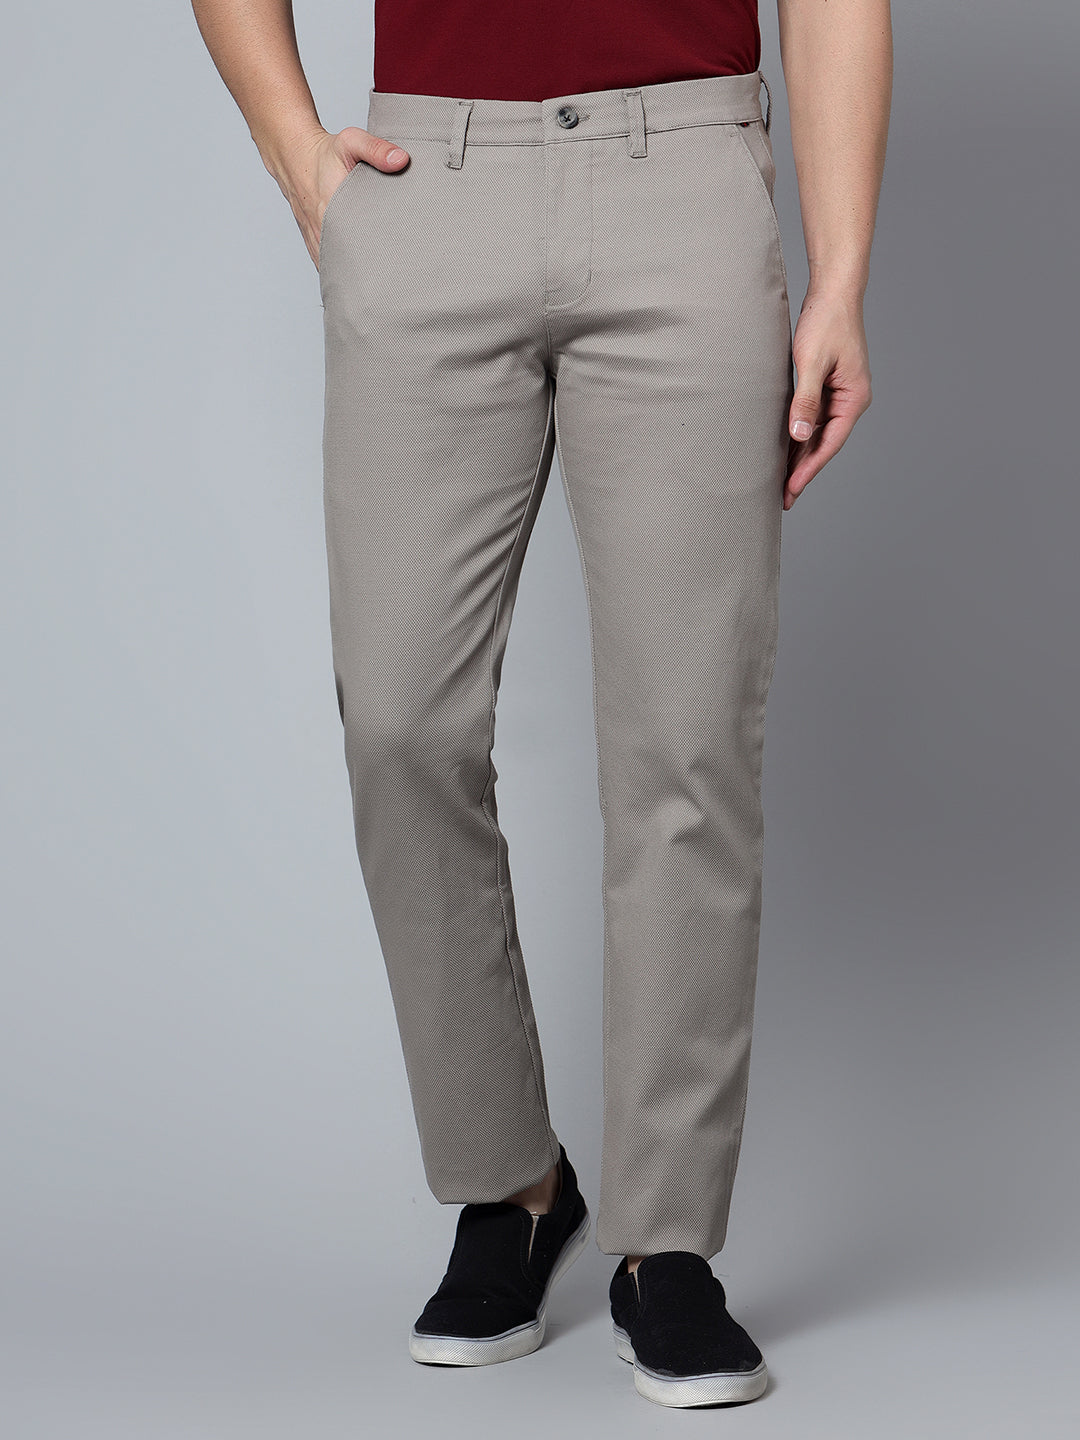 Buy Cantabil Men Fawn Trousers online